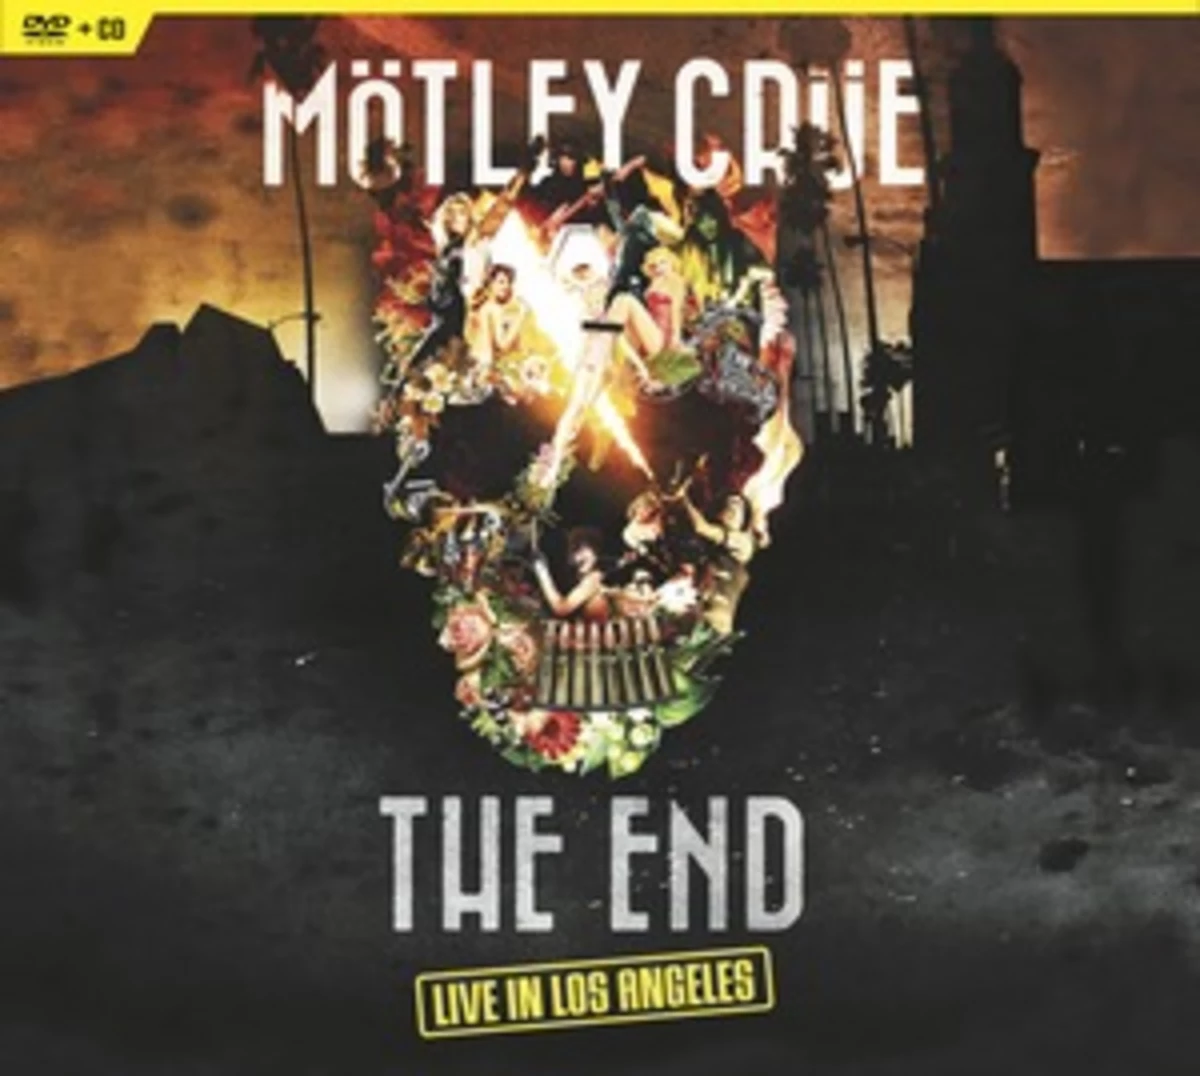 Motley Crue, 'The End: Live in Los Angeles' - DVD/CD Review